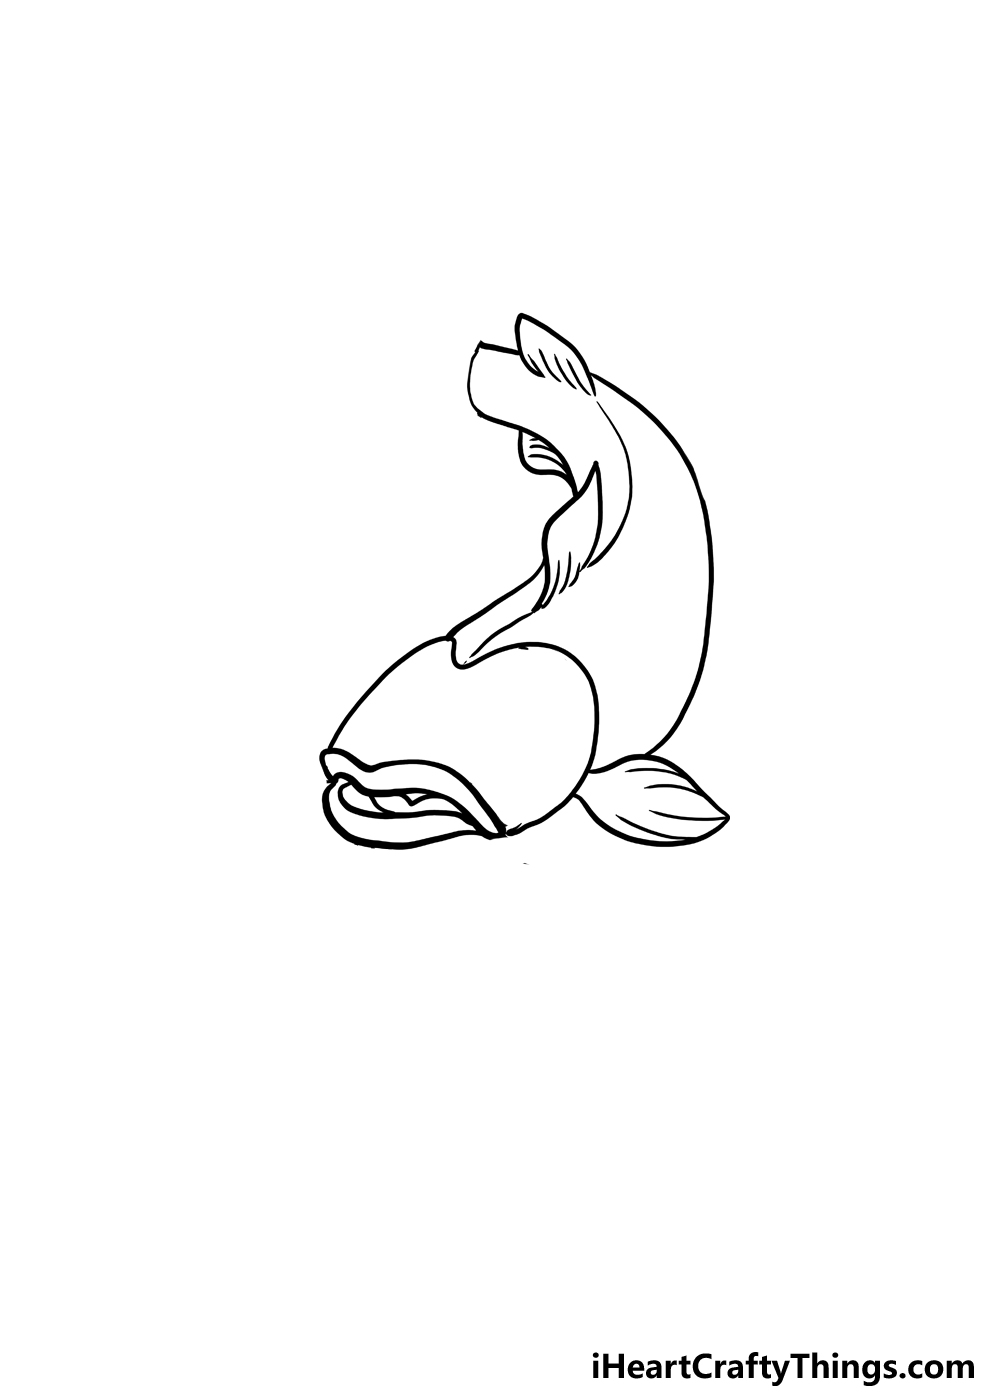 How to Draw A Catfish step 3